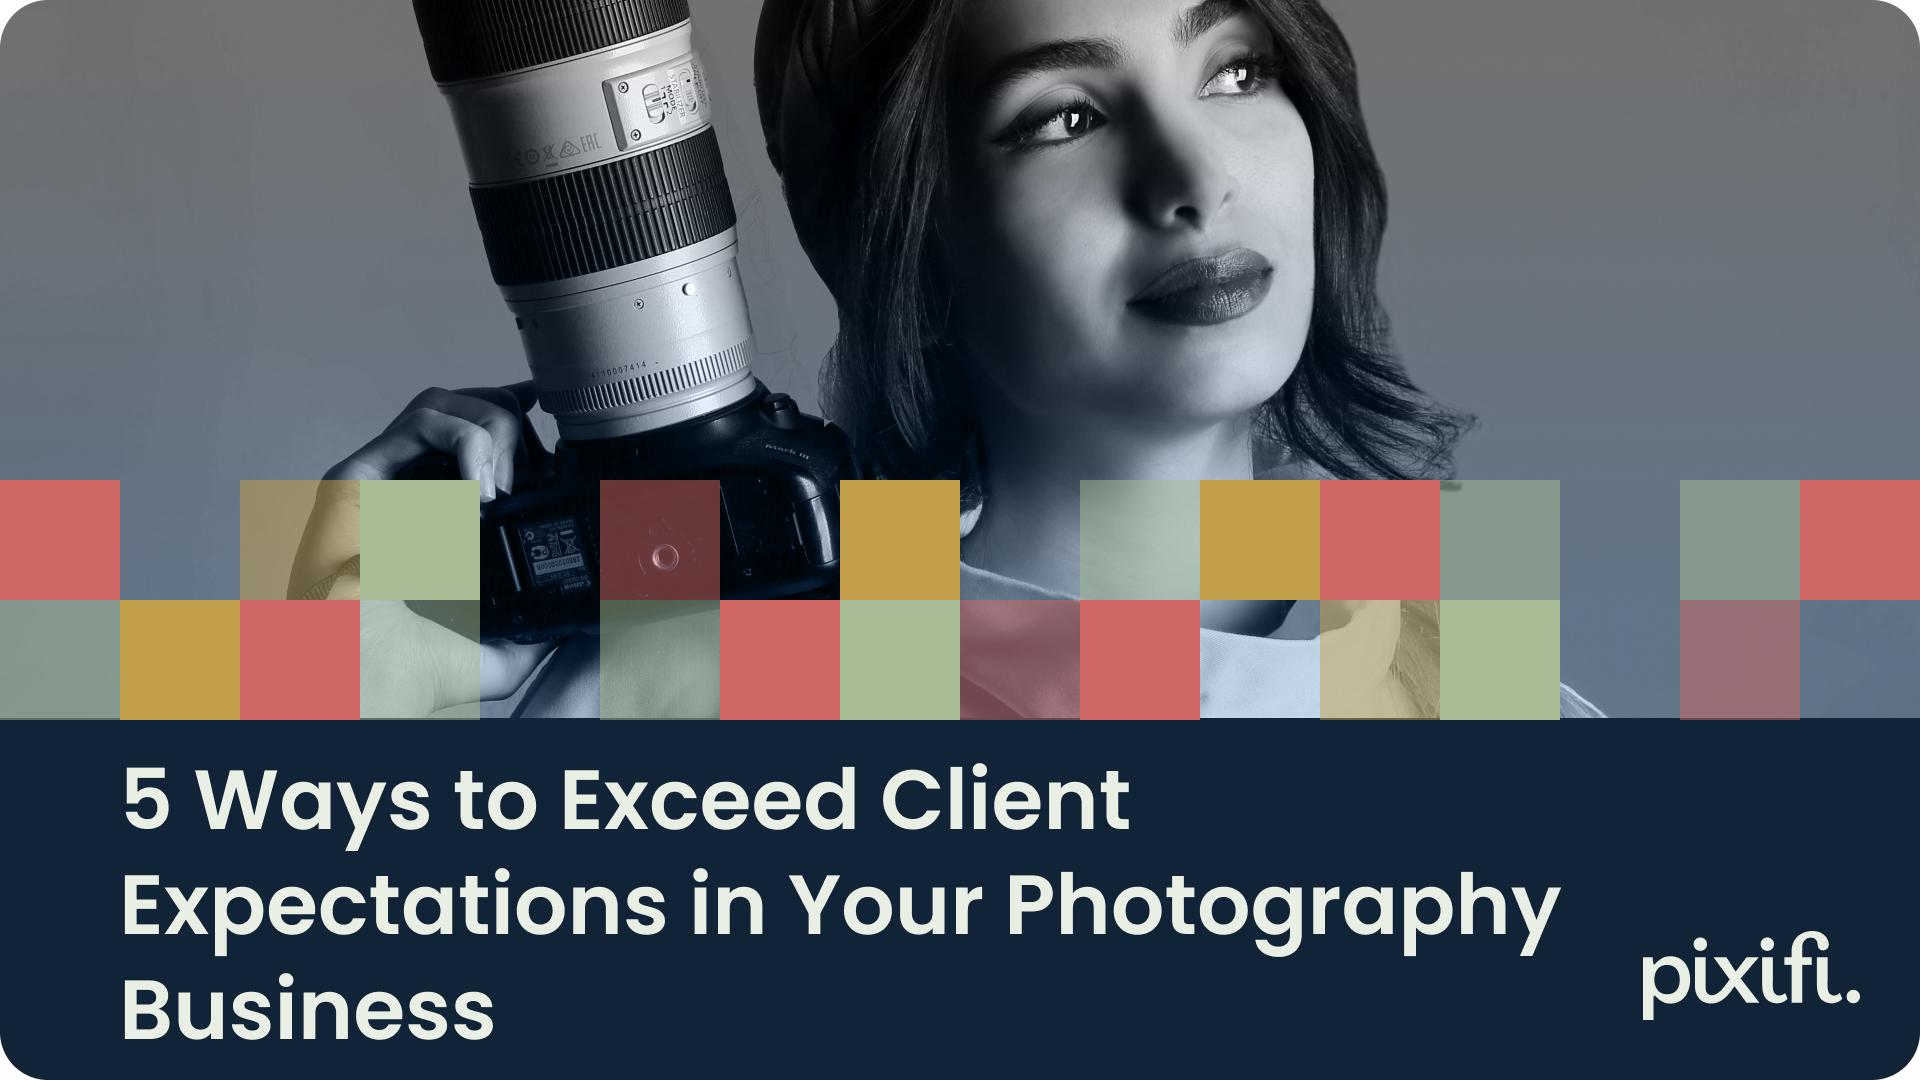 5 Ways to Exceed Client Expectations in Your Photography Business